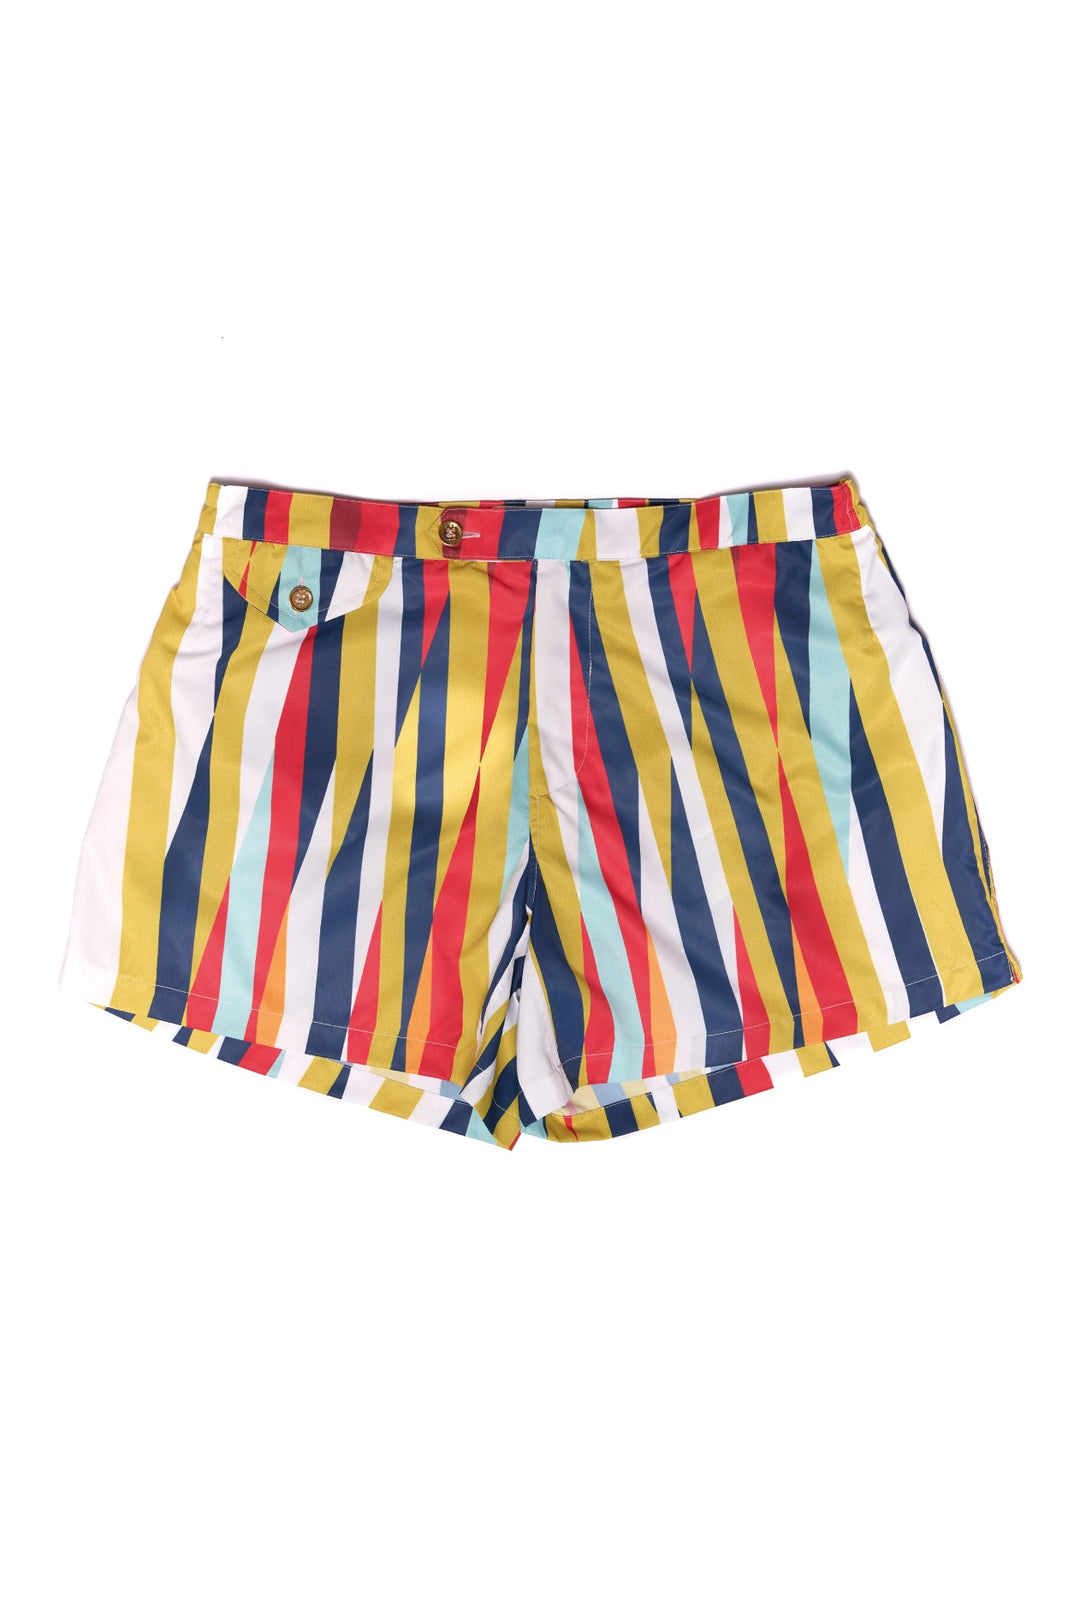 Colorful striped shorts with front pocket and button detail